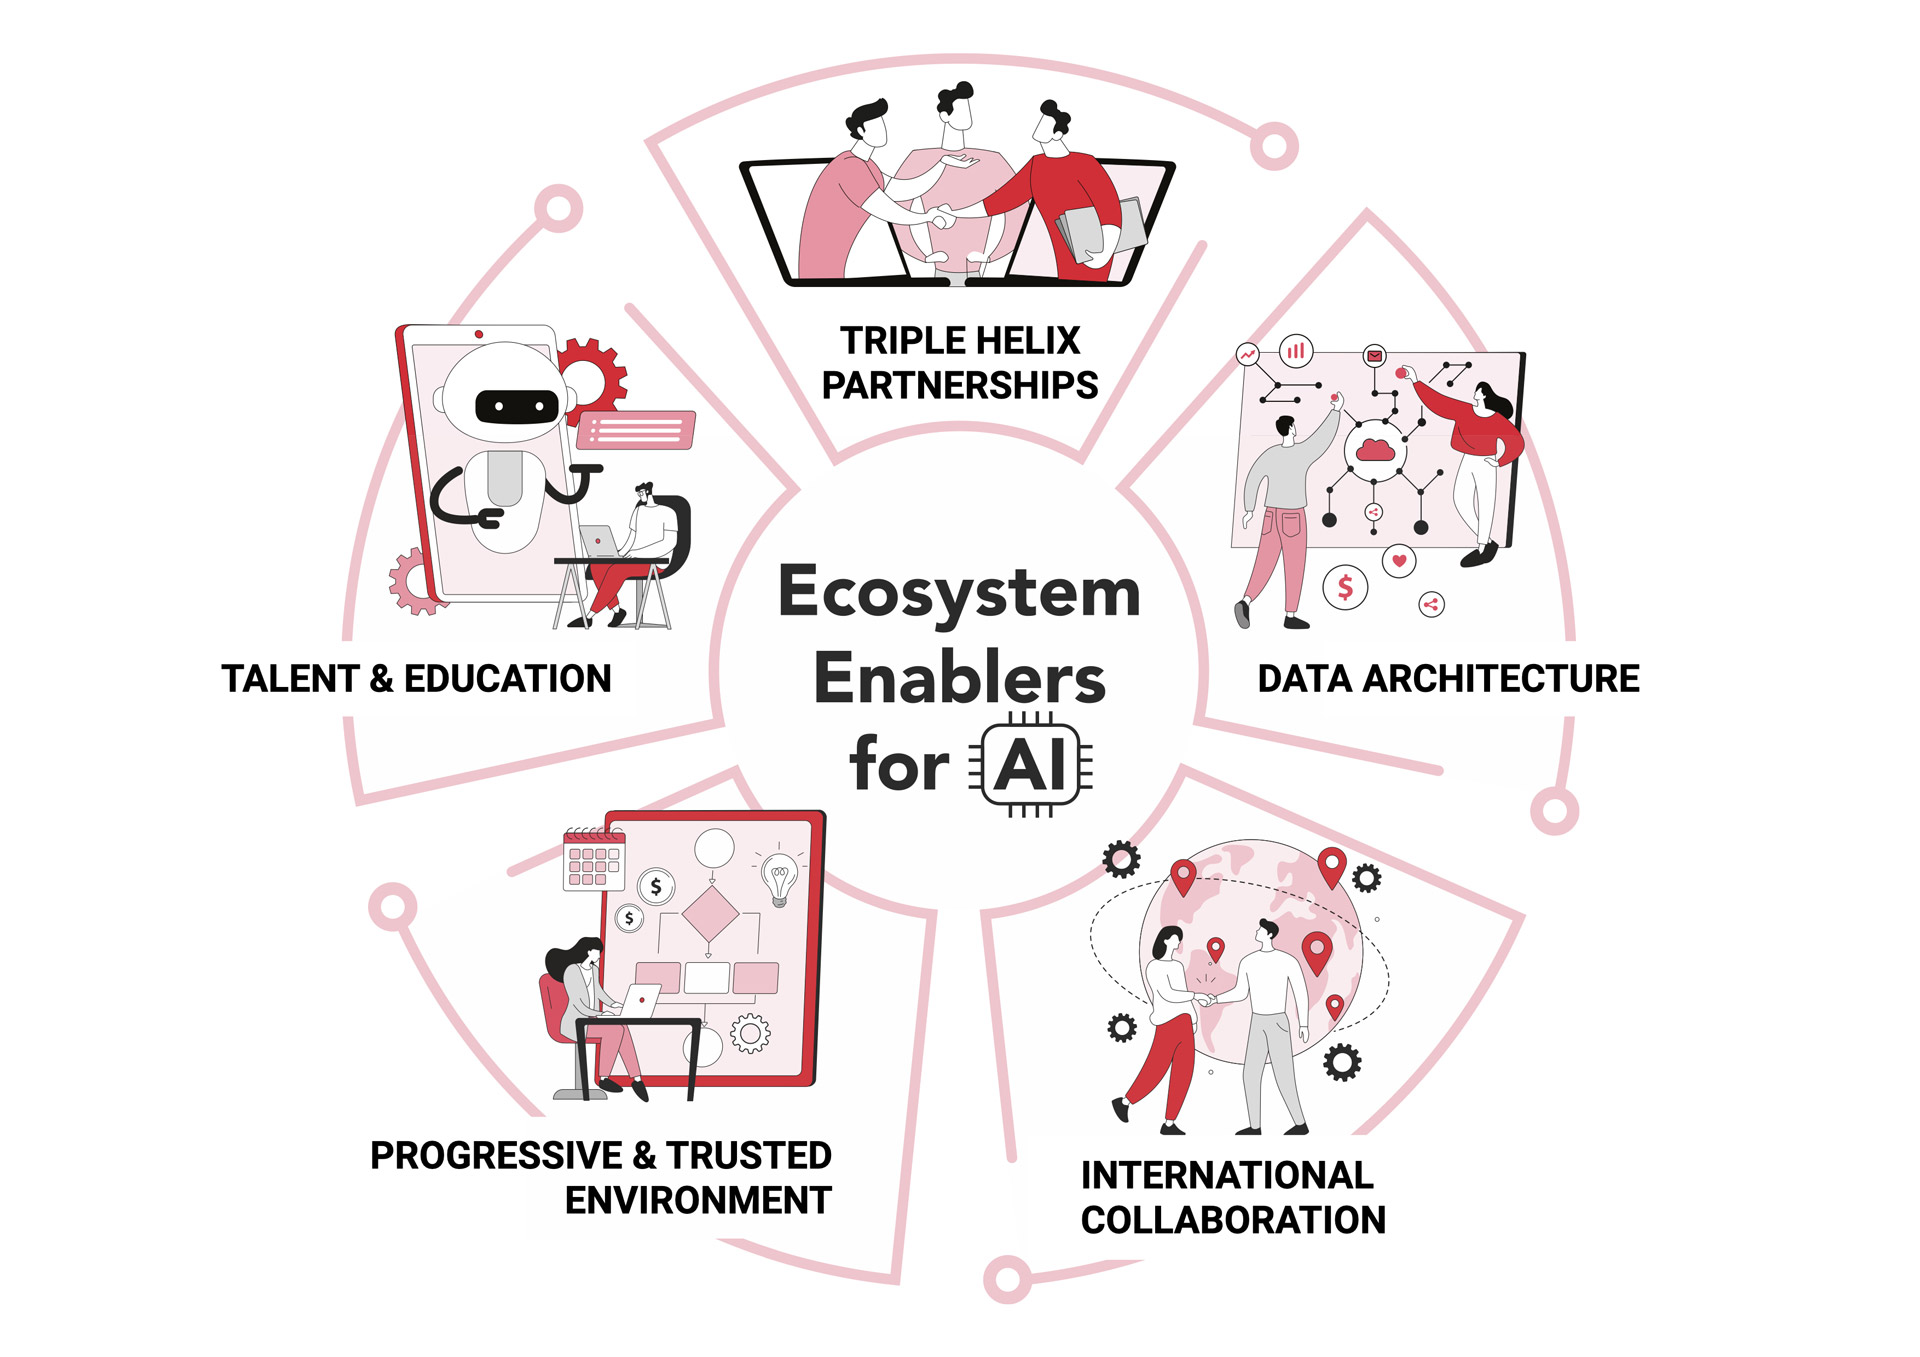 Ecosystem Enablers for AI